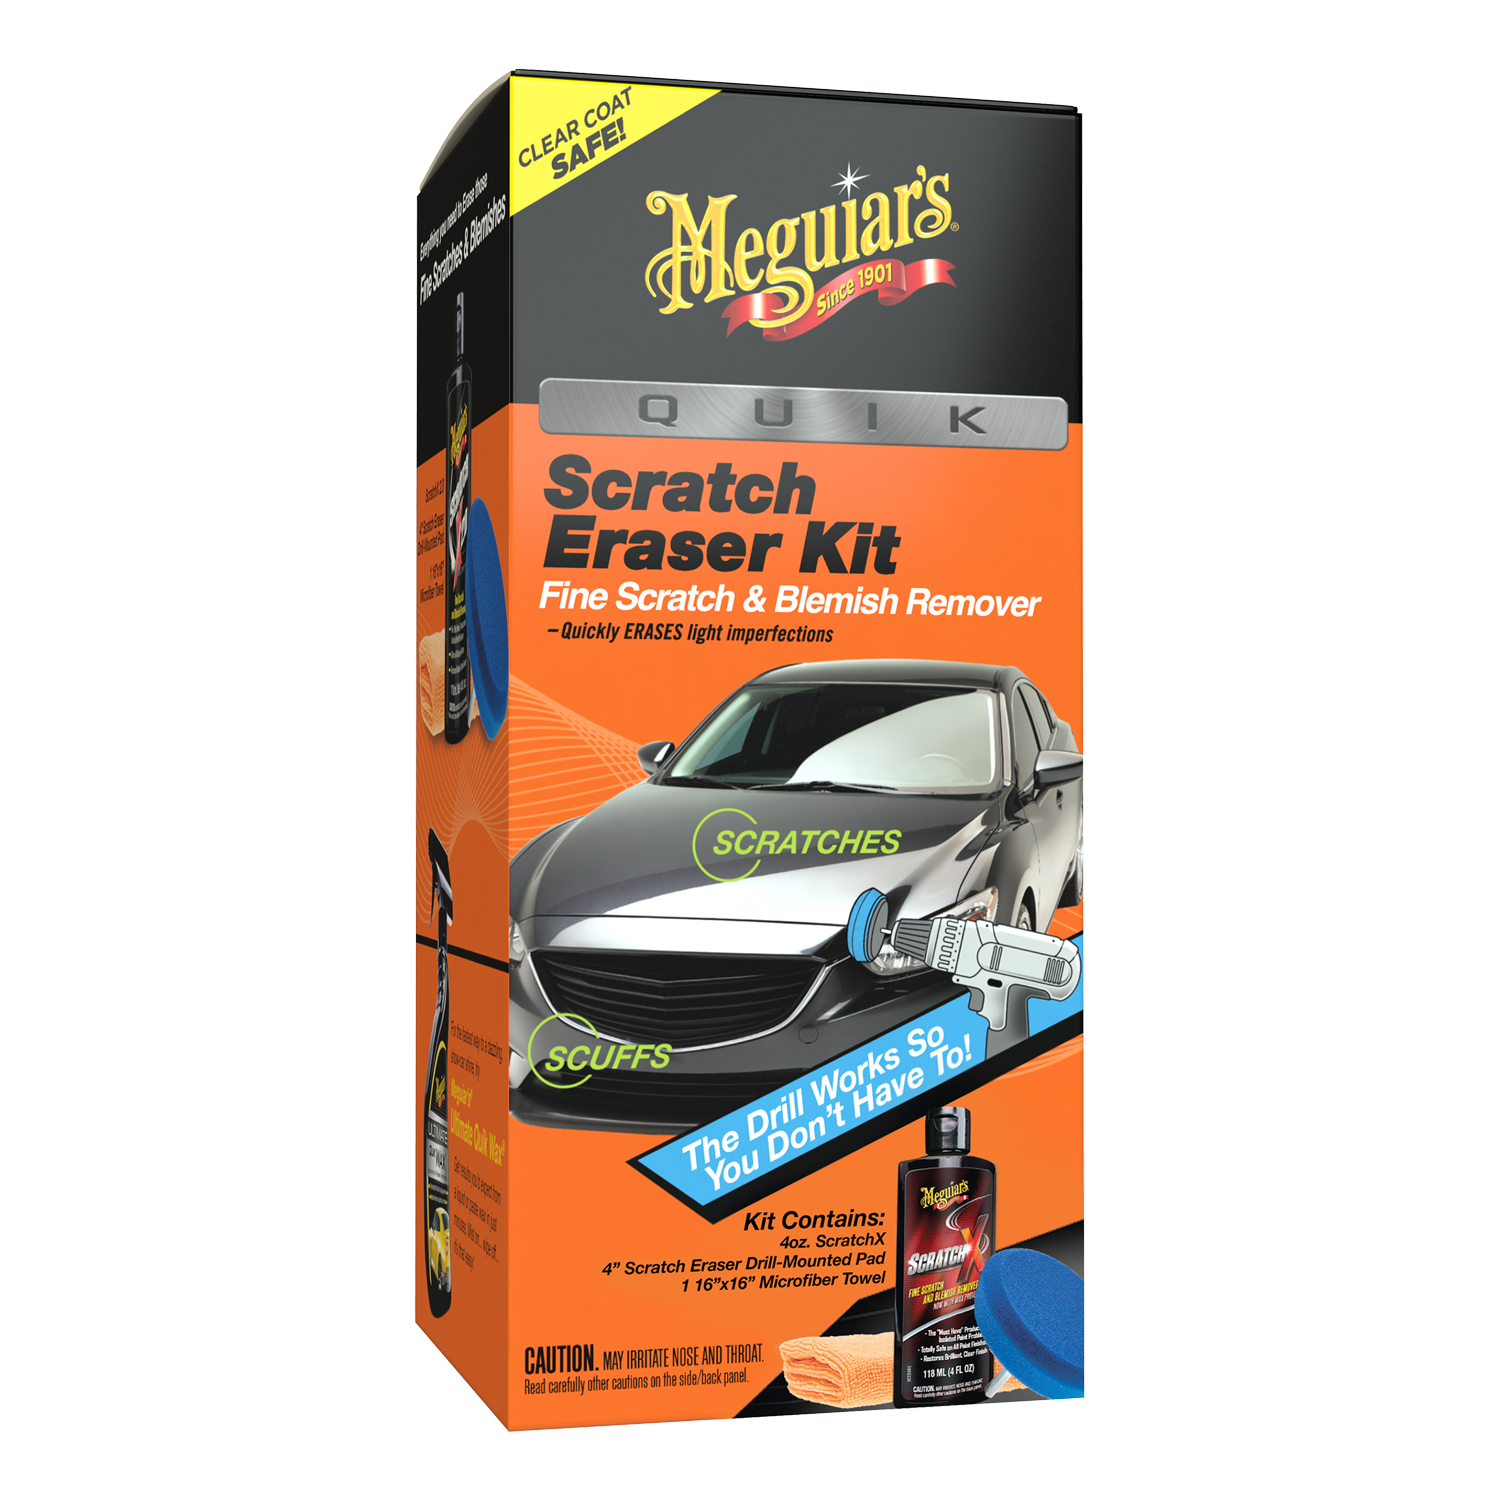 Cleaning - Polishing - Scratch Removal Kit - Clean & Polish Kits